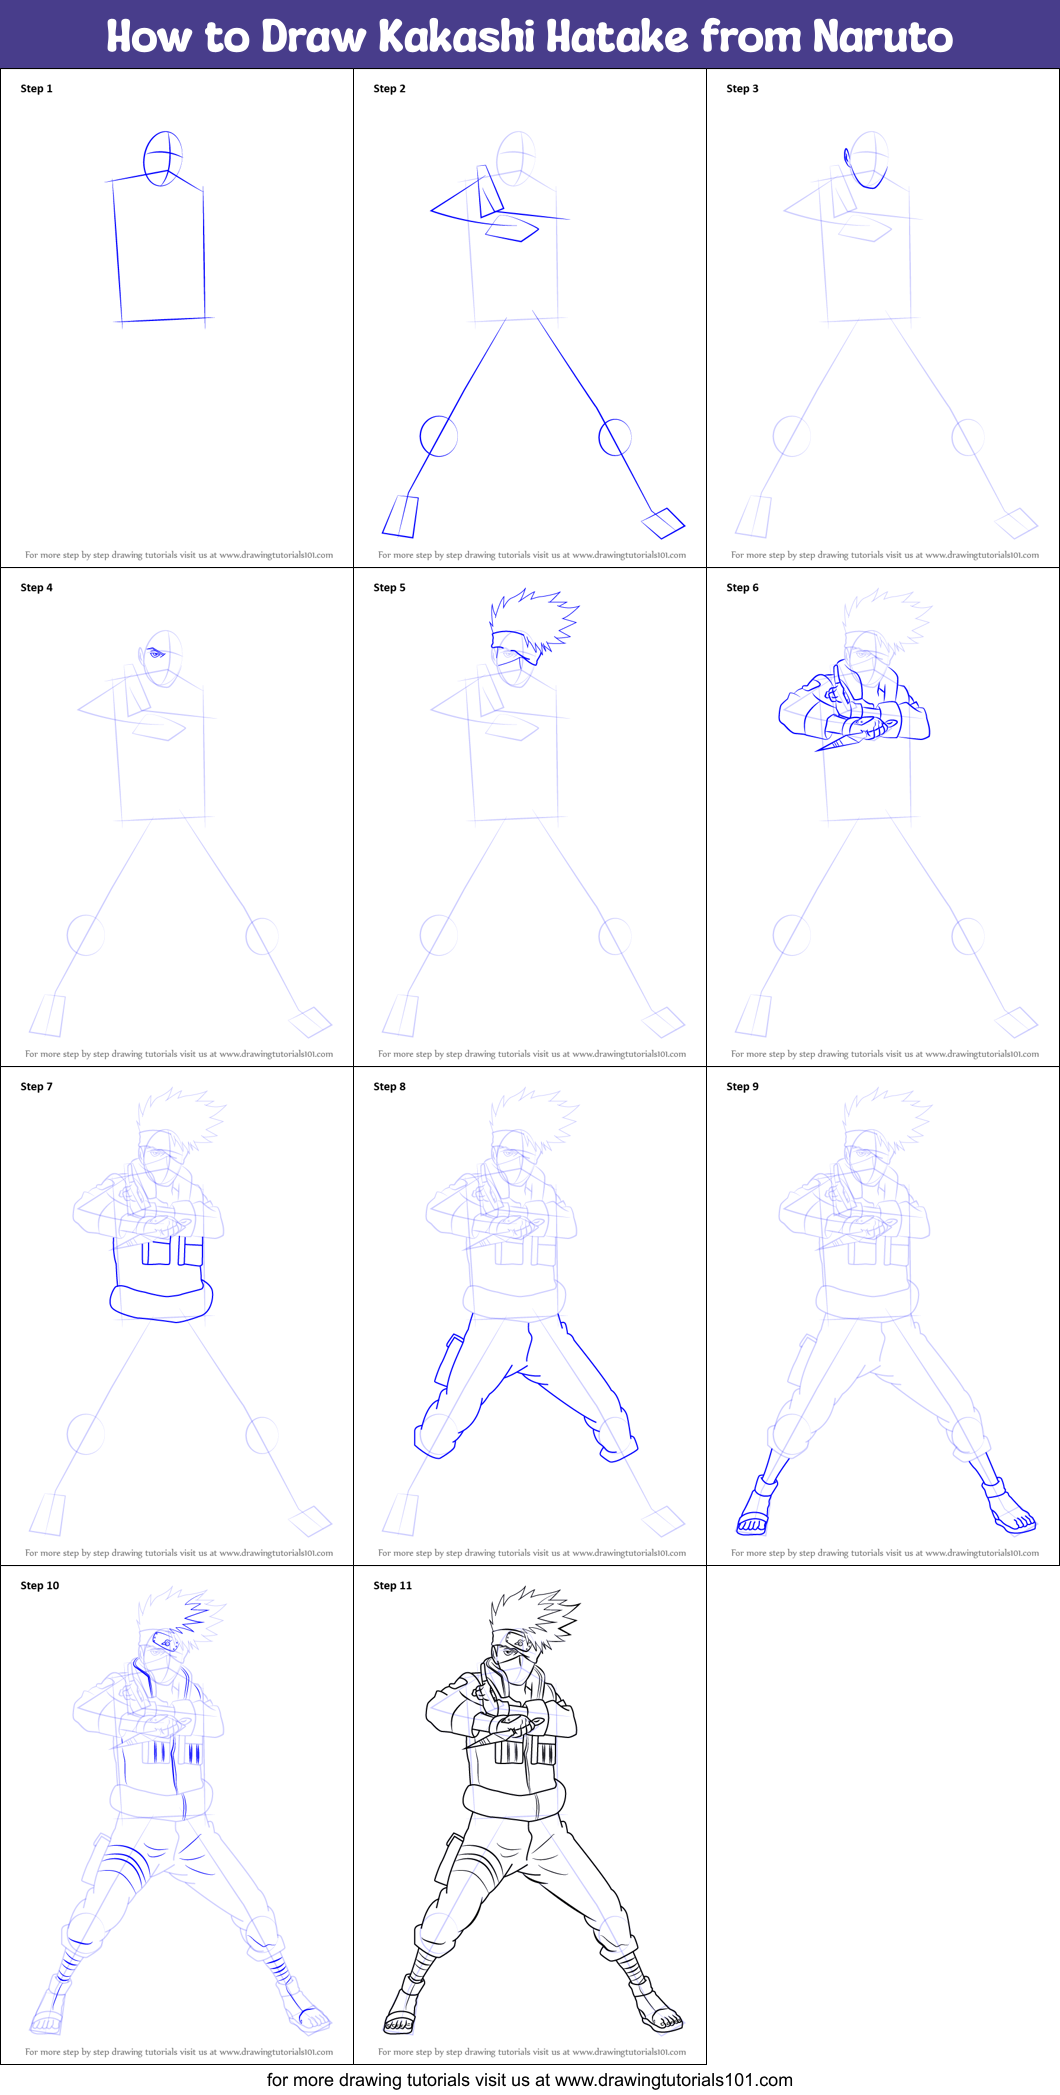 How to Draw Kakashi Hatake from Naruto printable step by step drawing